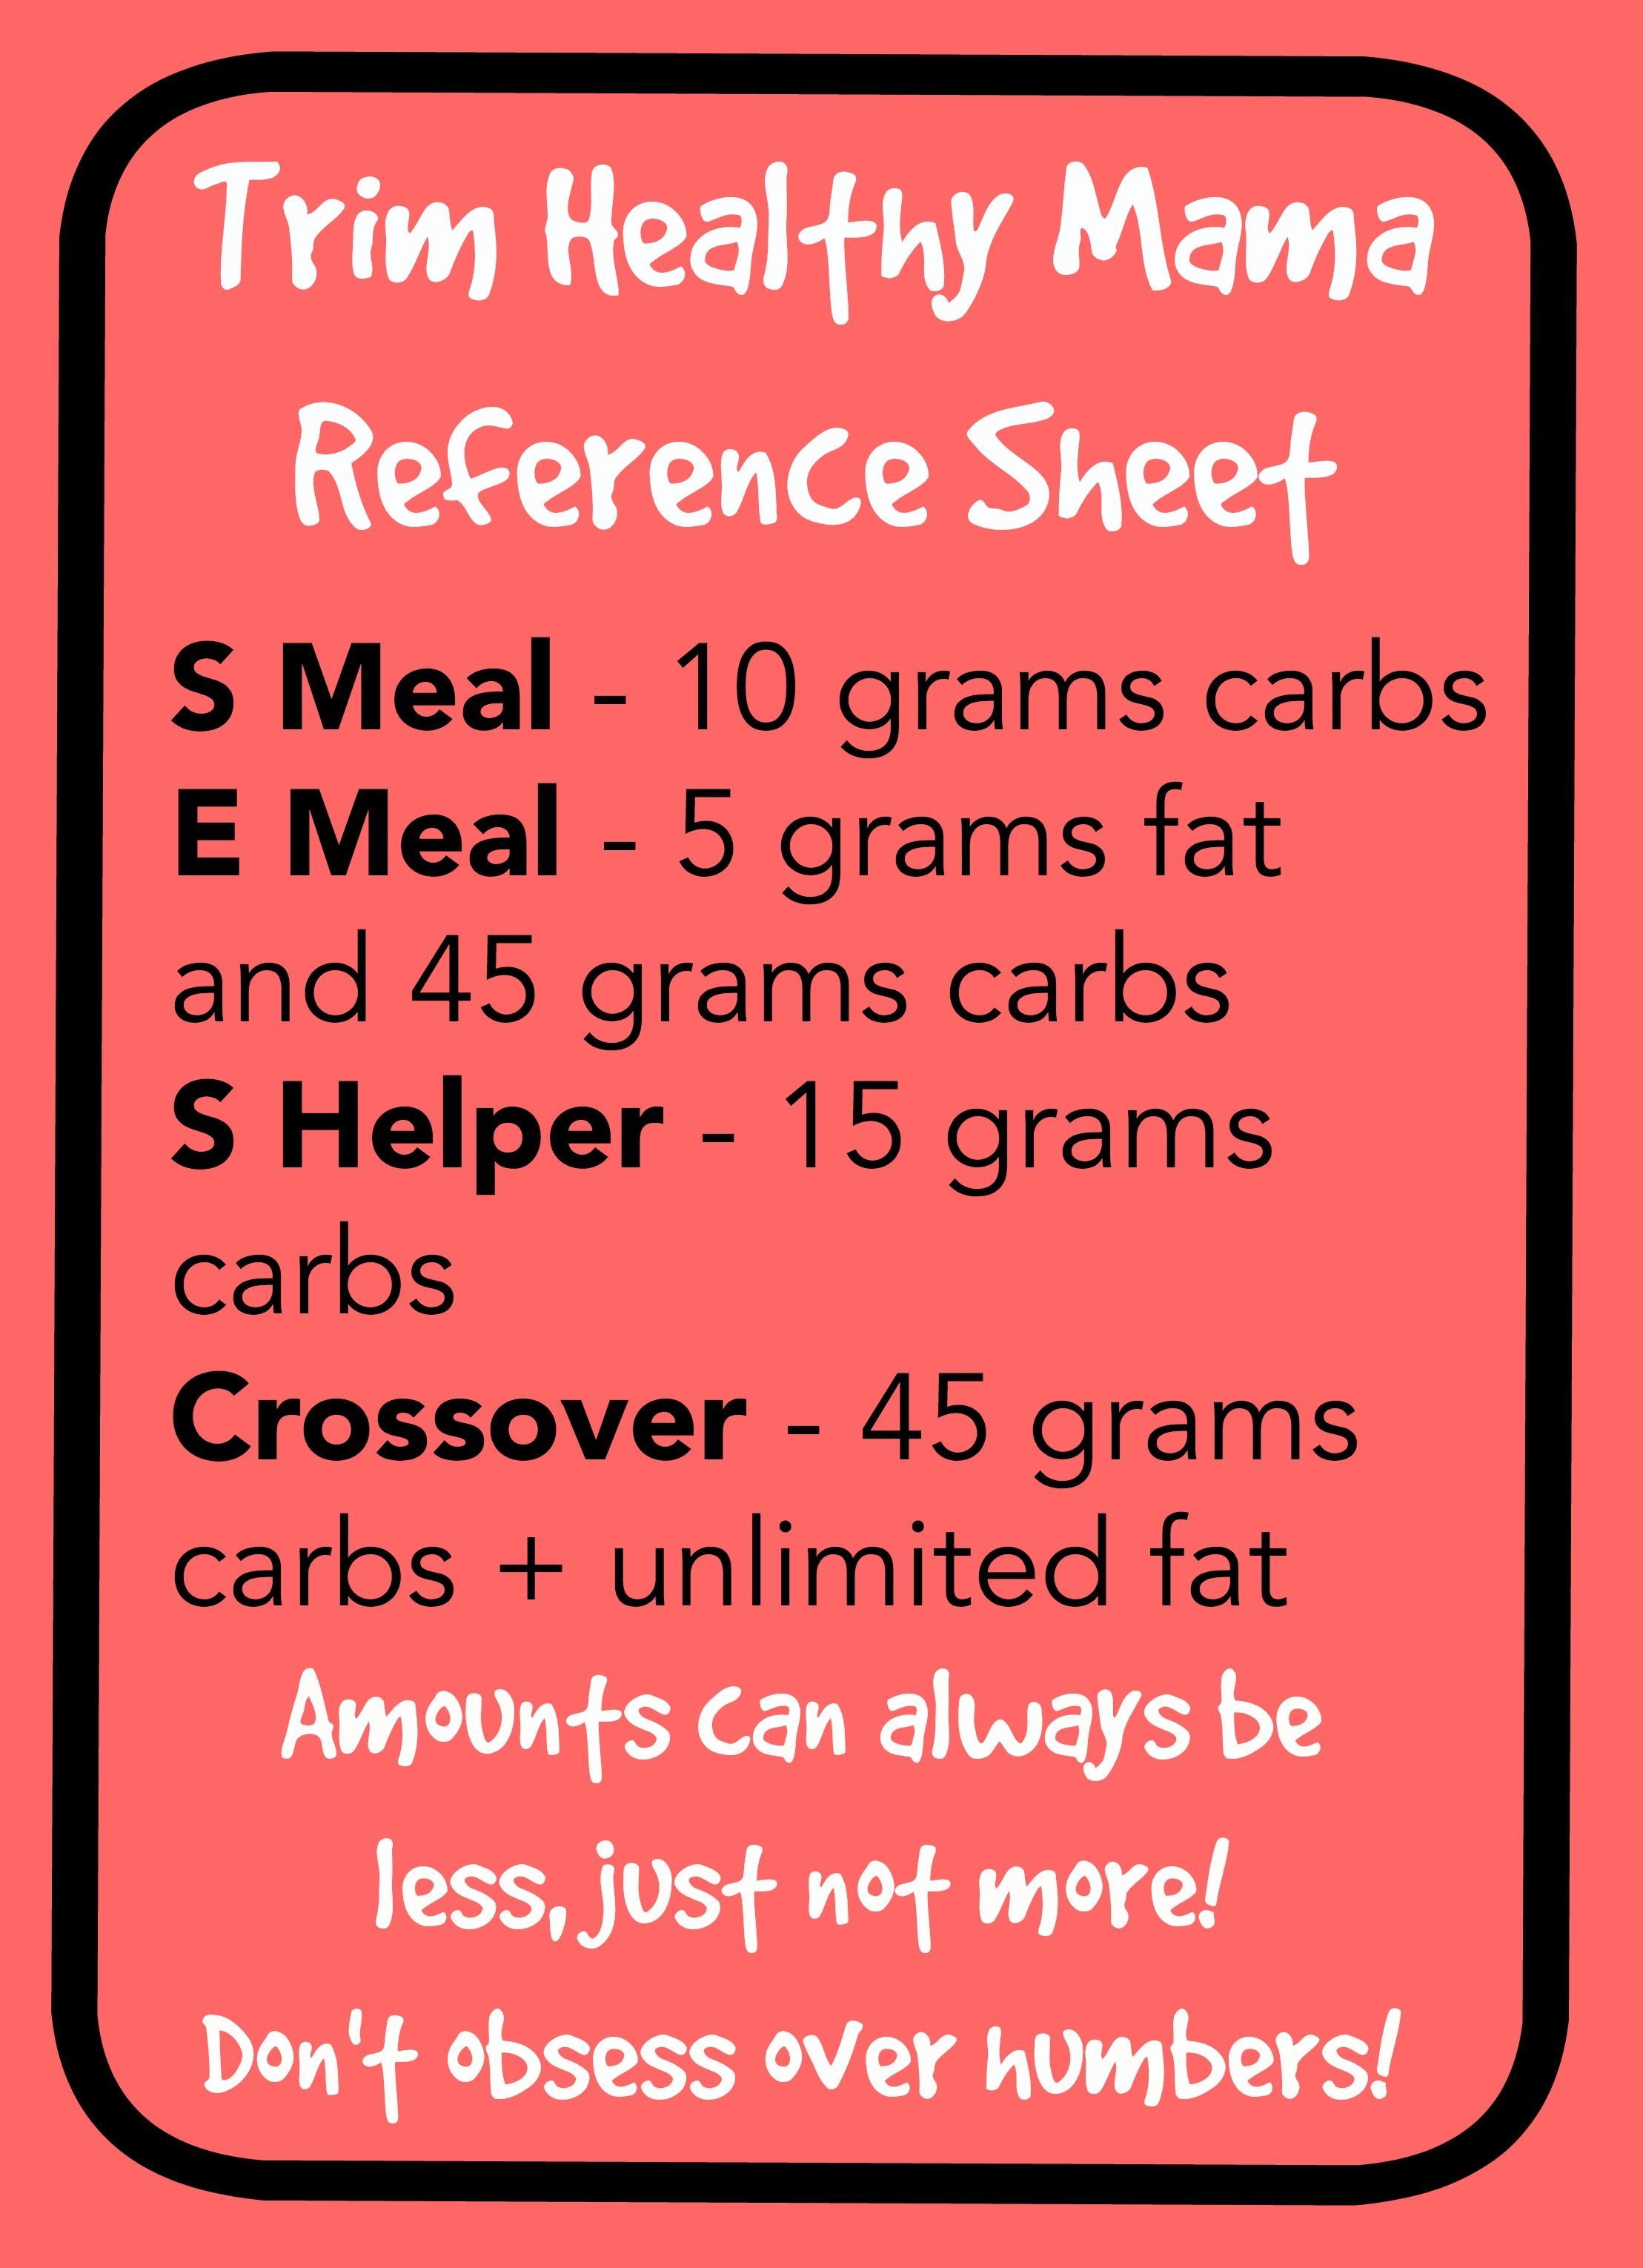 While Trim Healthy Mama (the diet I’m currently trying) isn’t about numbers, it’s helpful to have a reference if you’re wondering